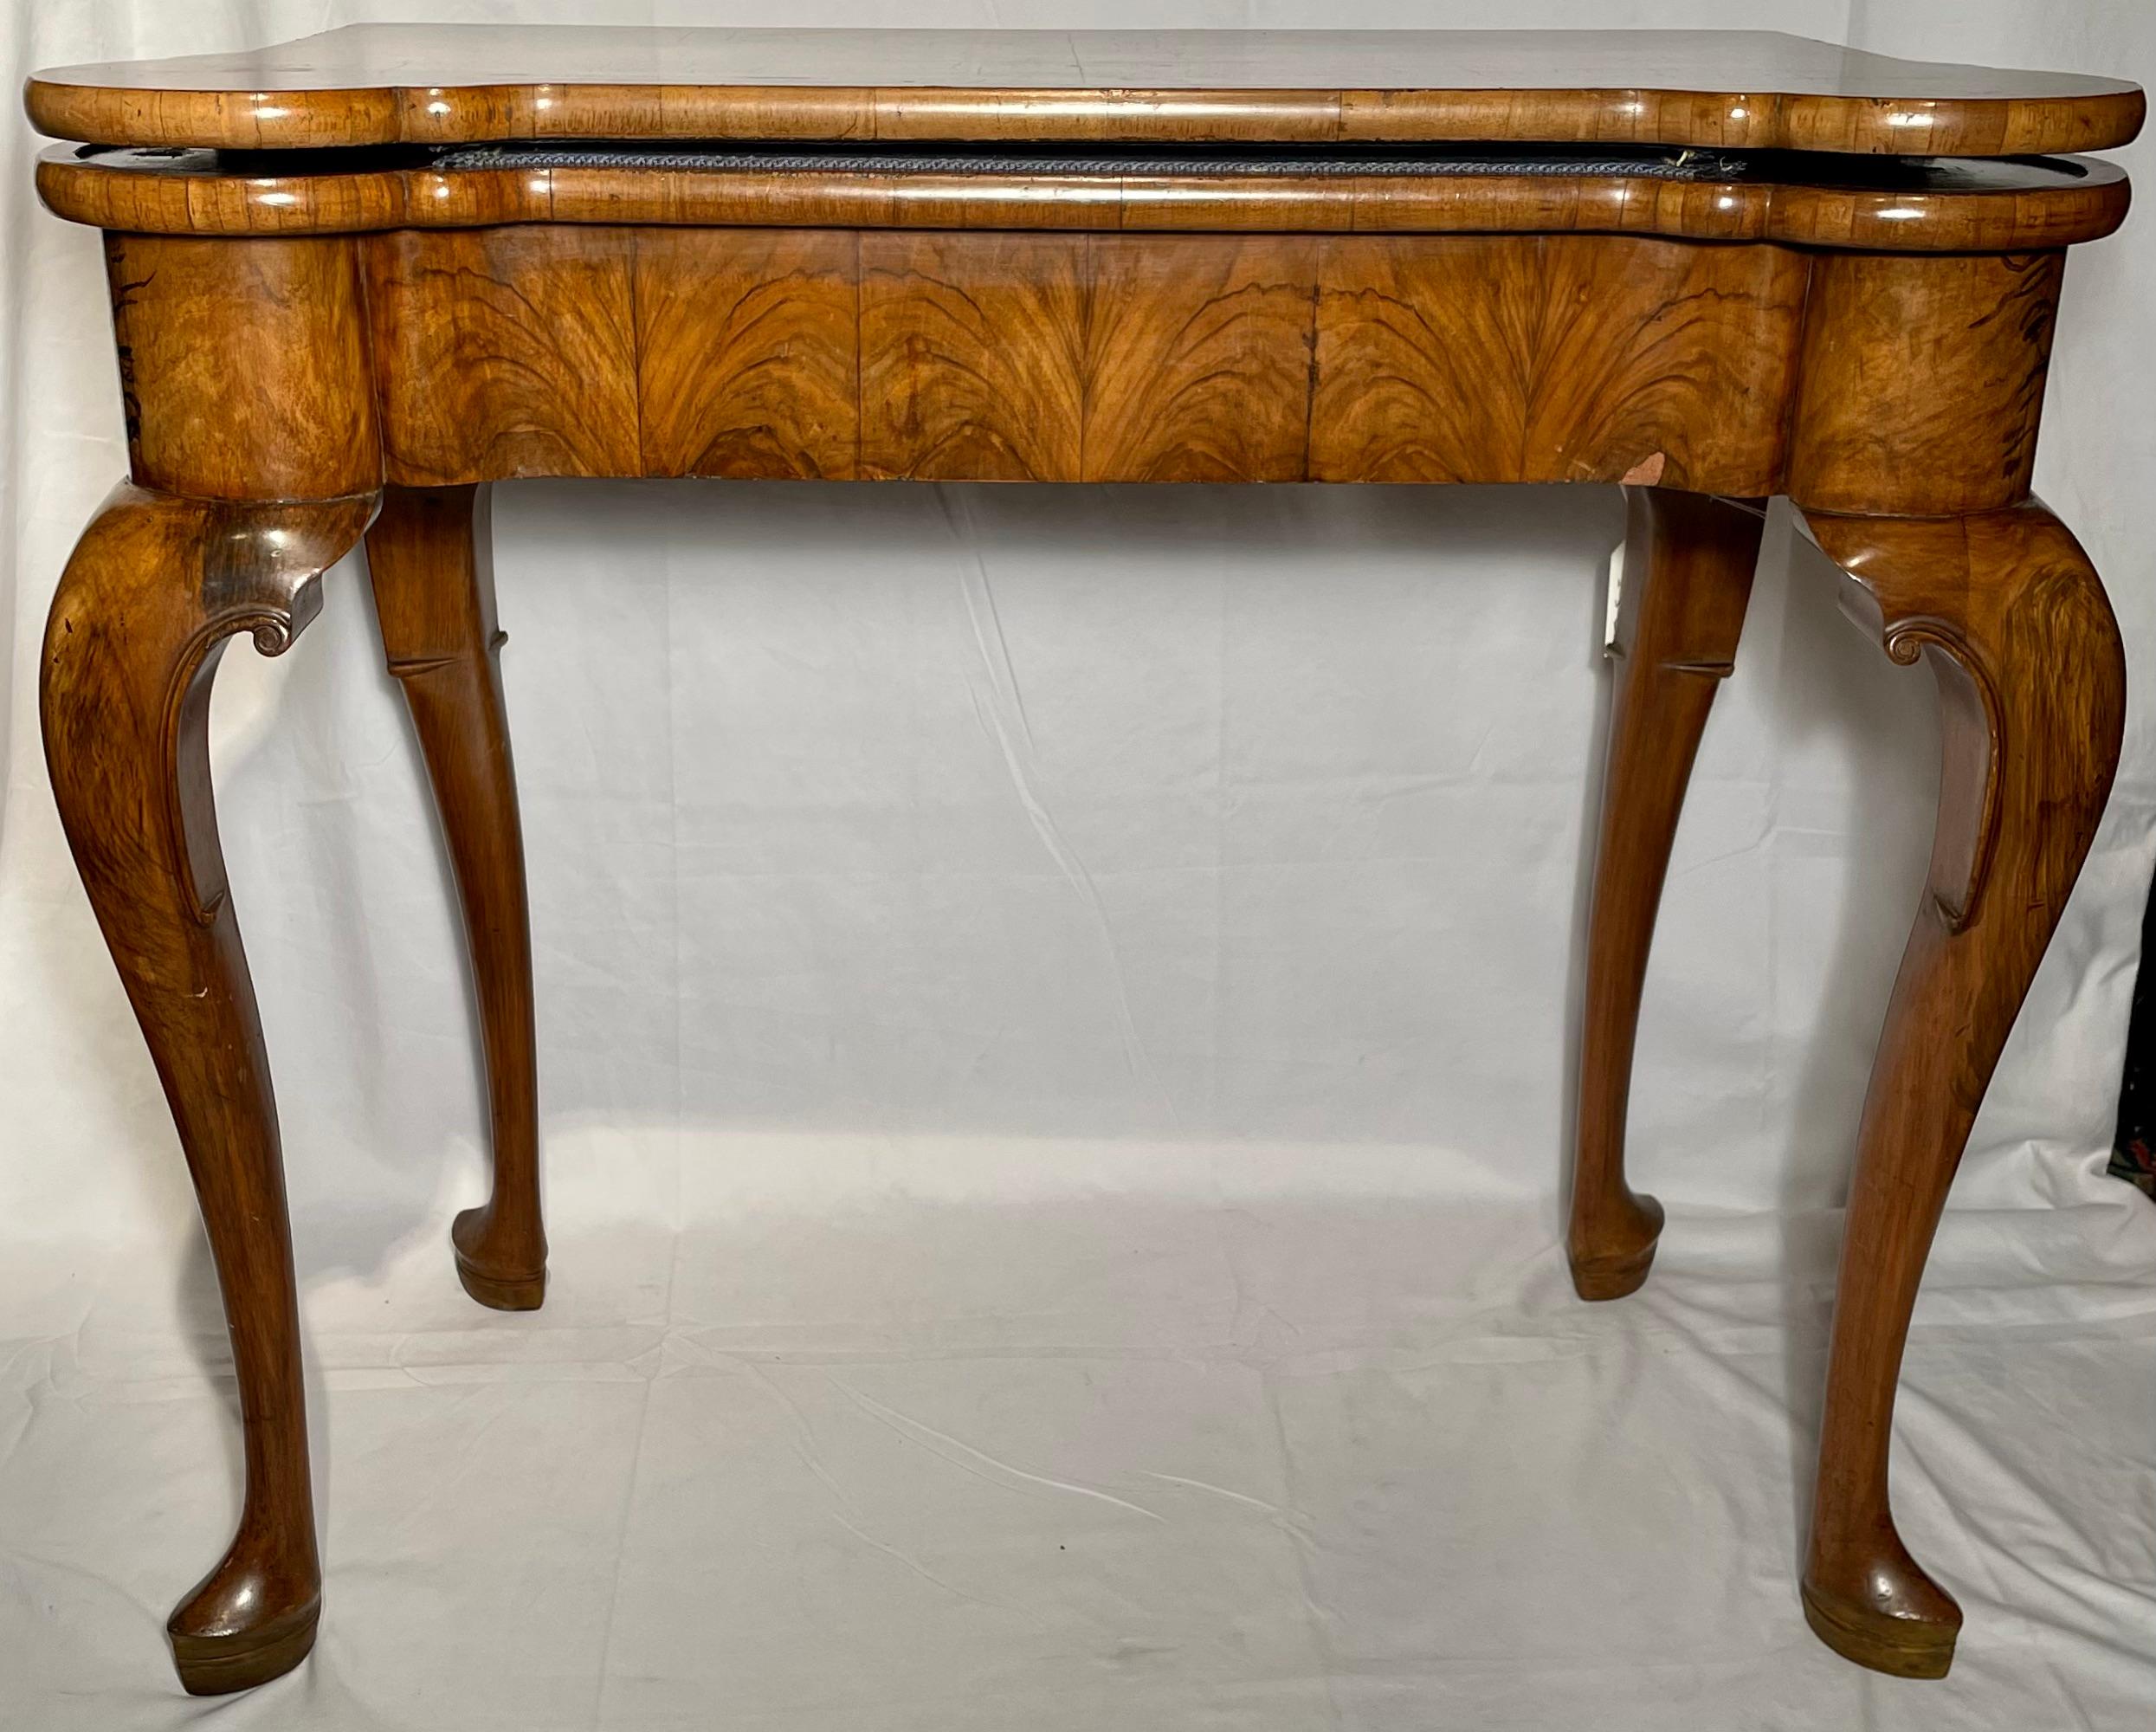 Antique 19th century English Queen Anne burled walnut console and card table.